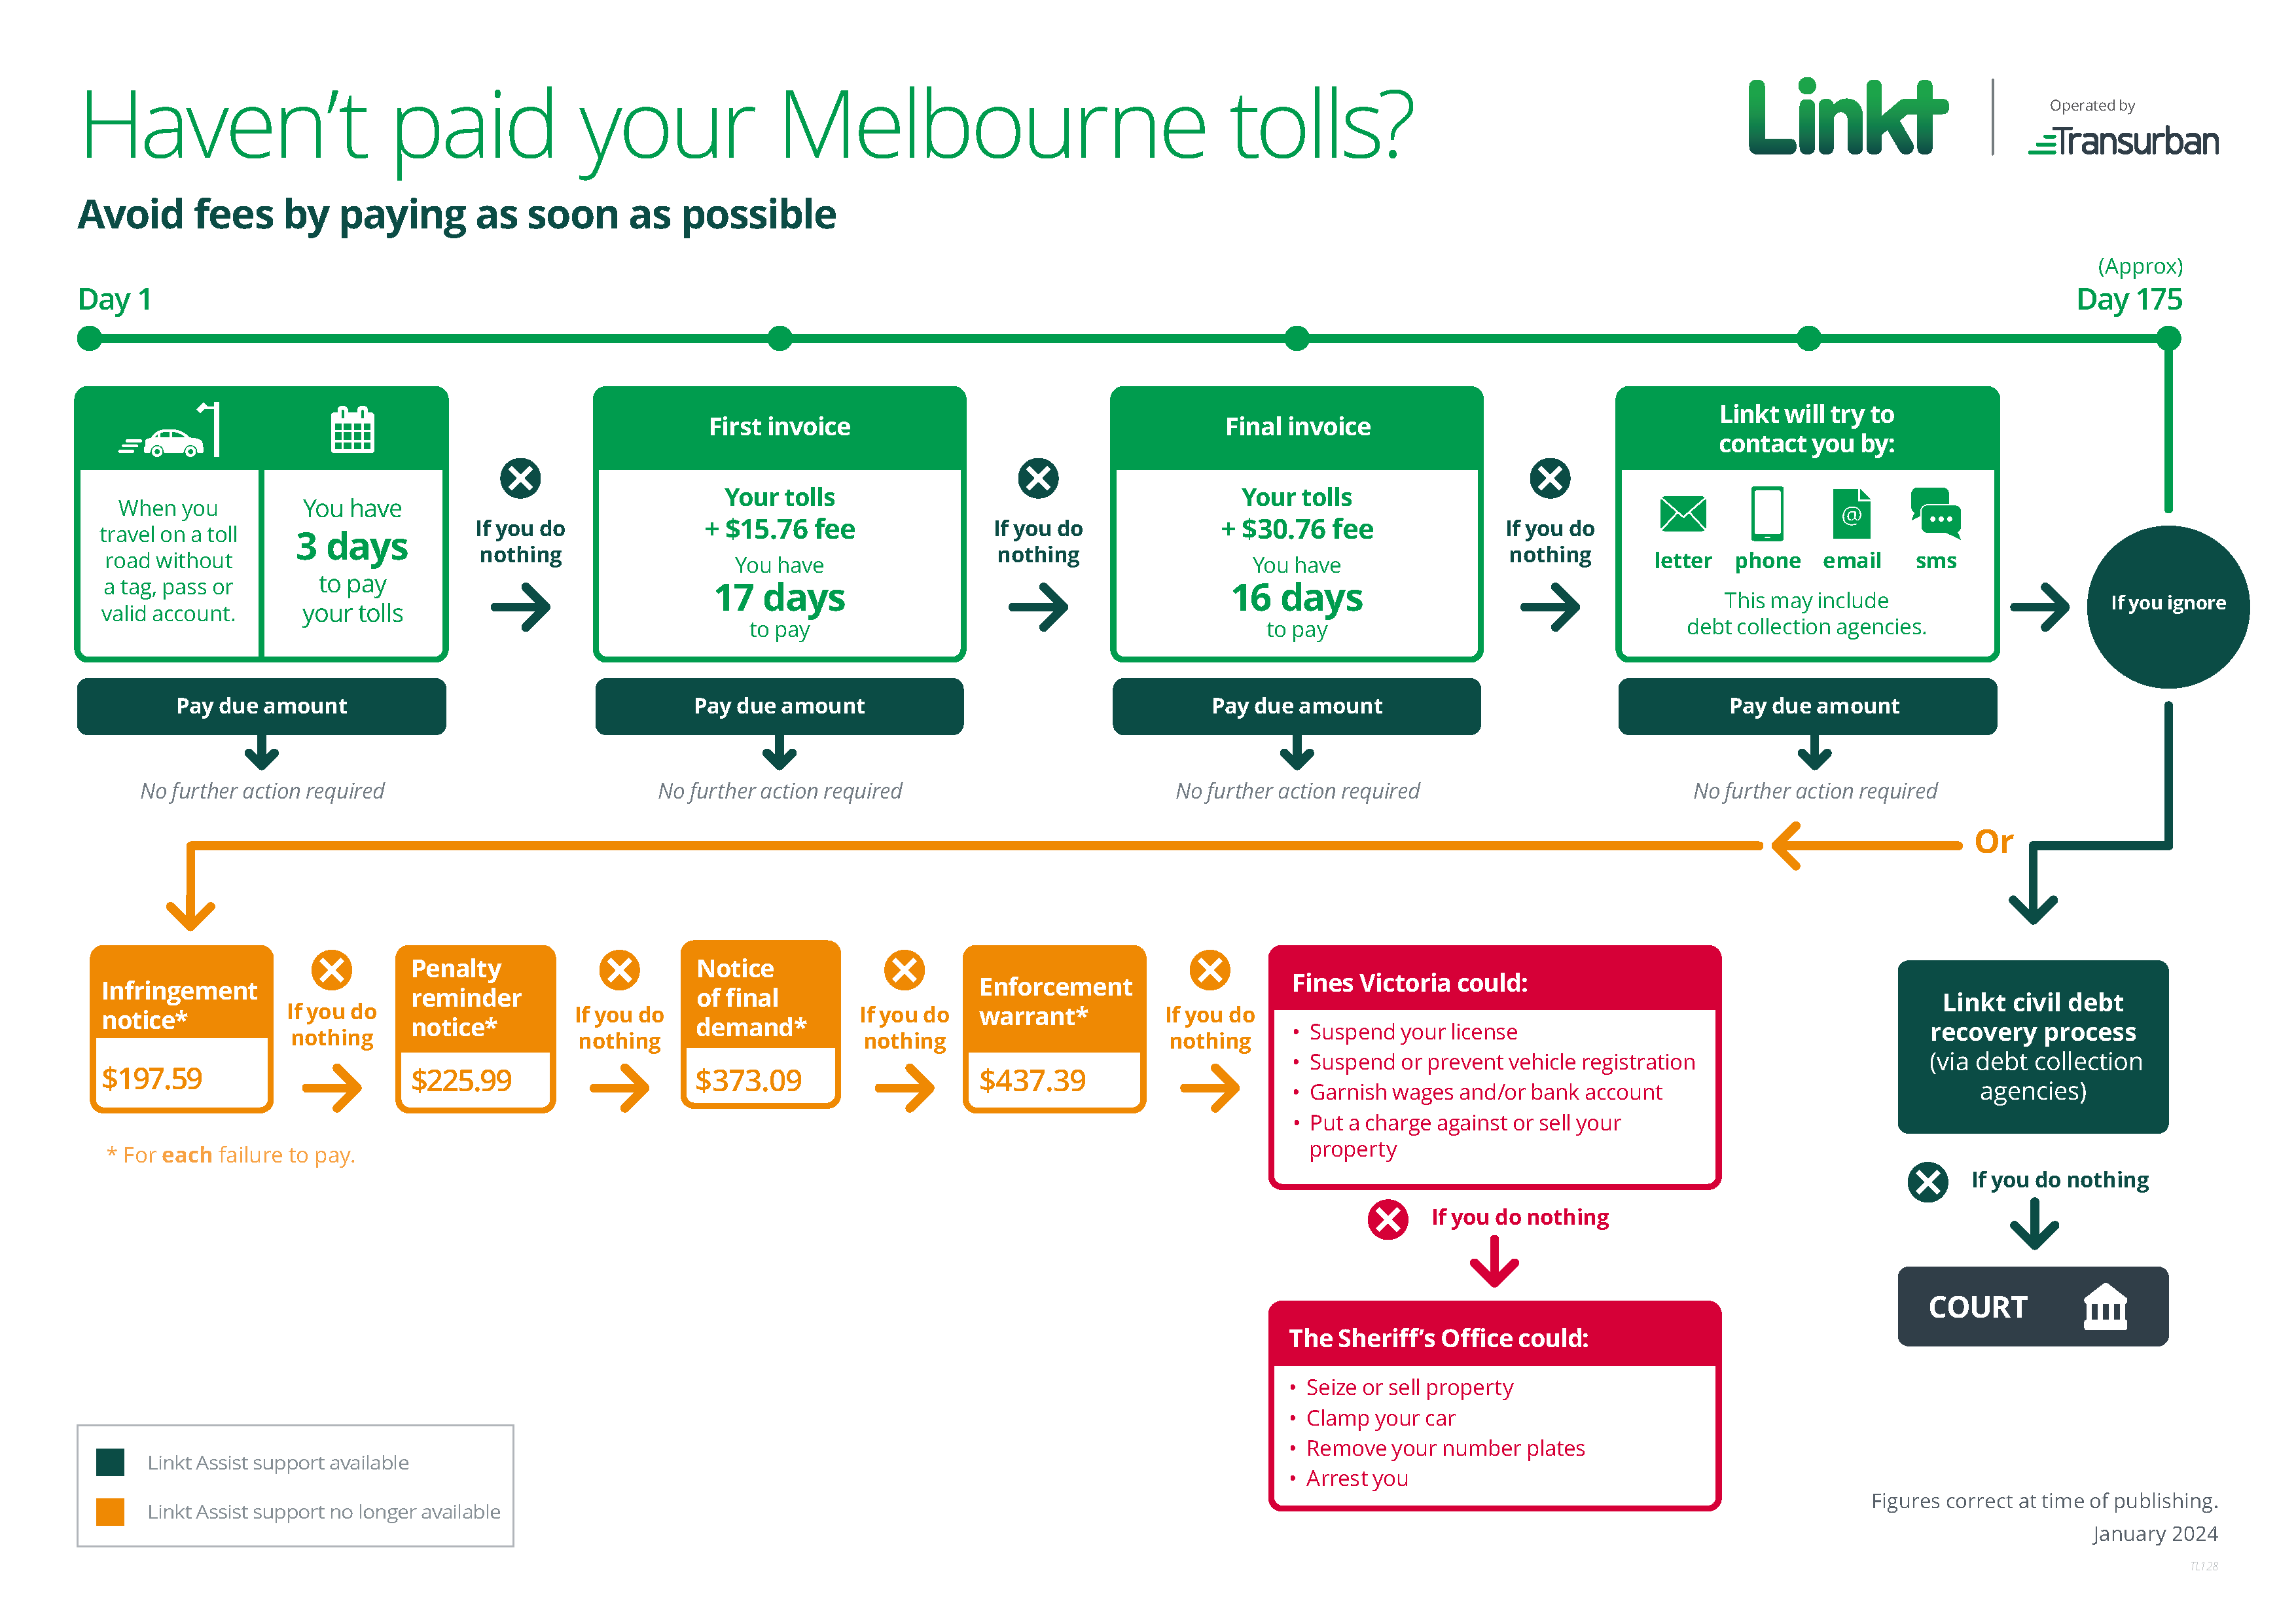 Diagram displaying timeline of payment events for unpaid tolls, text description found below